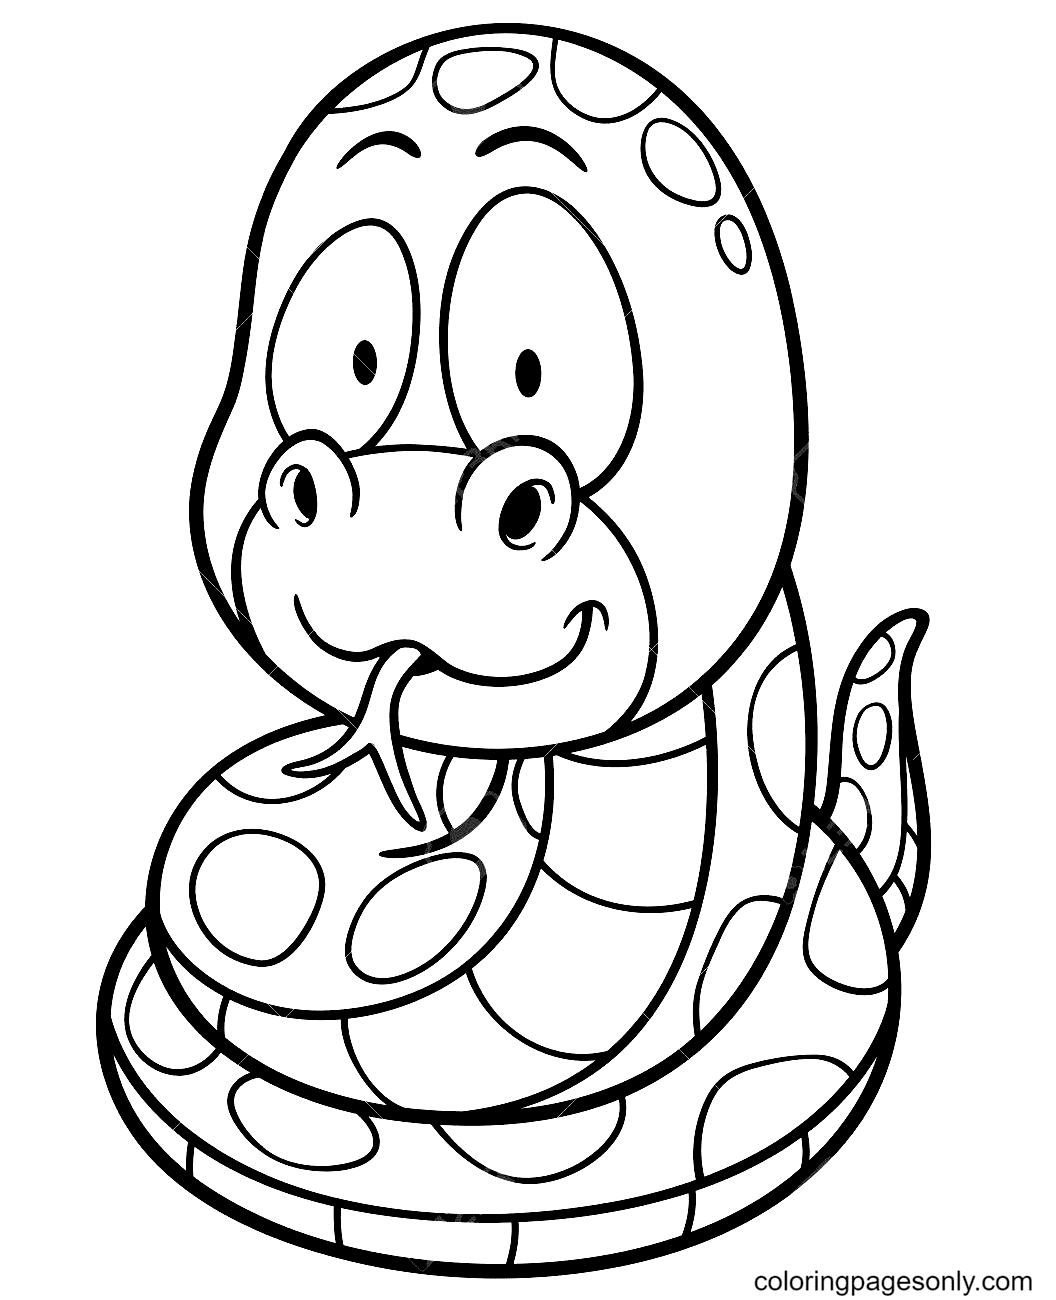 Cartoon Snake Coloring Page